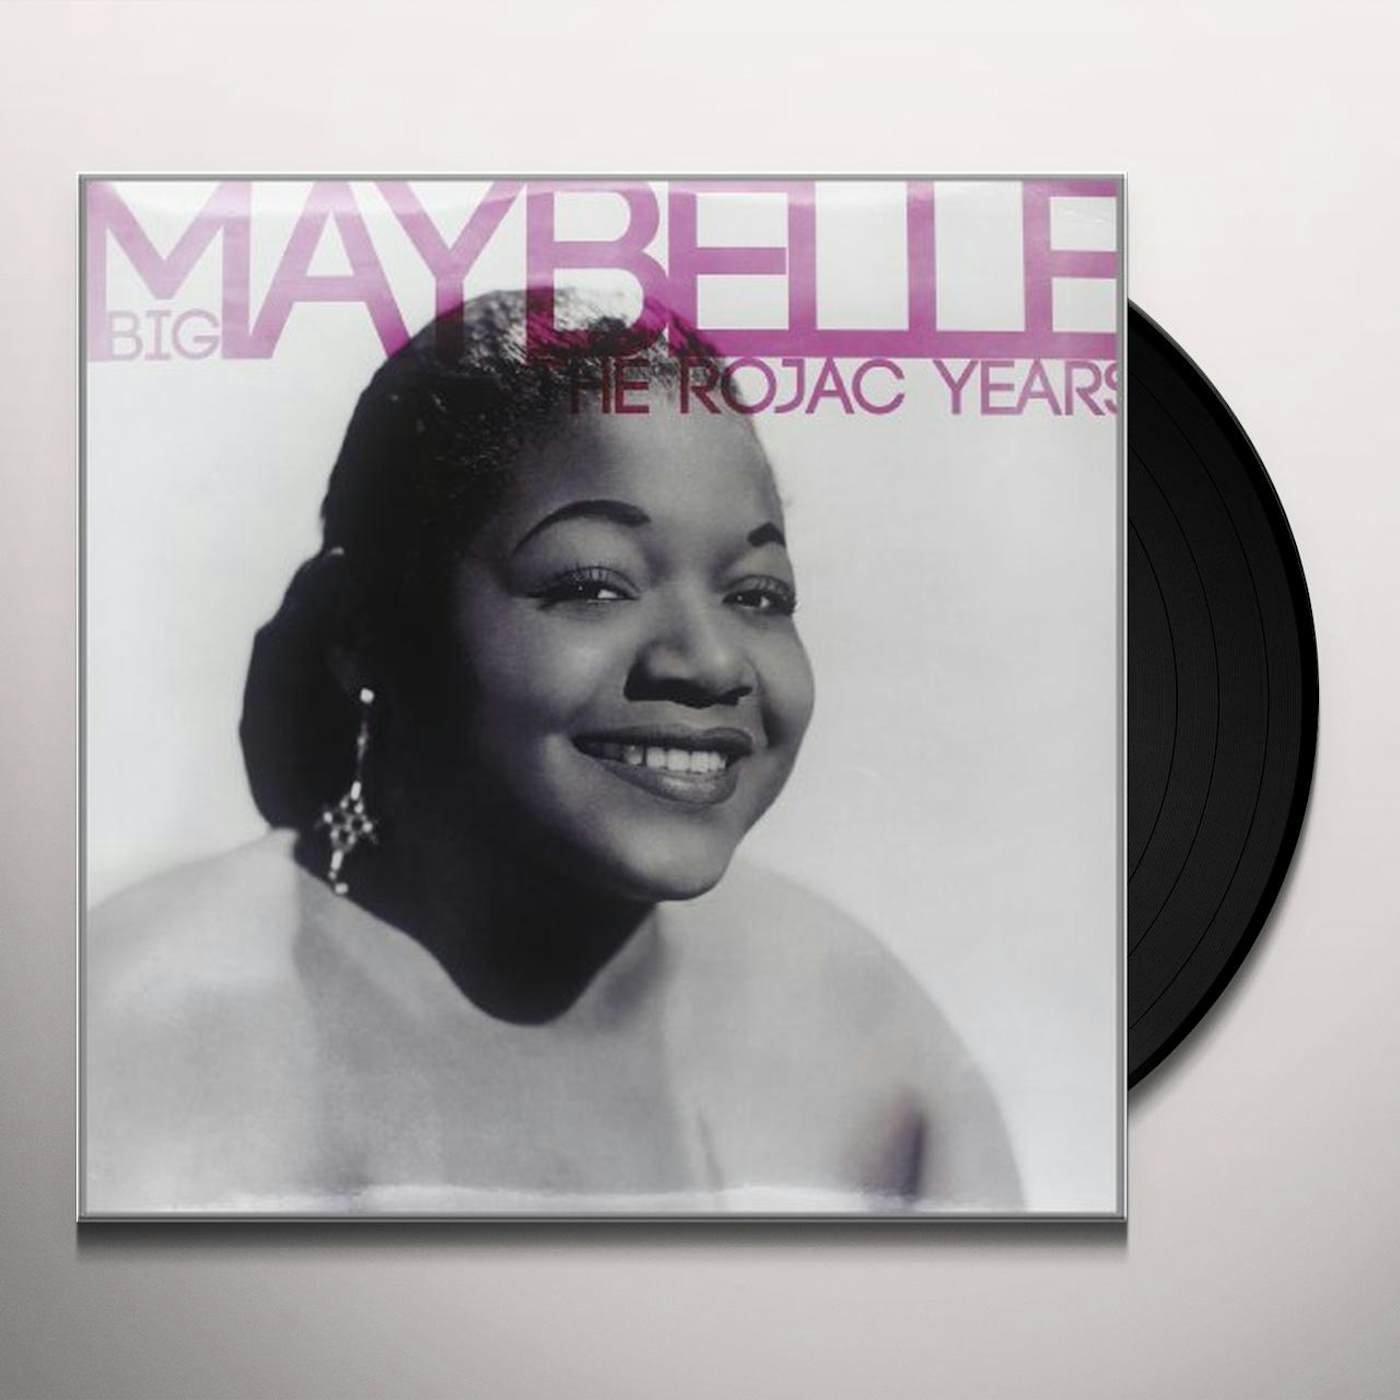 Big Maybelle BEST OF THE ROJAC YEARS Vinyl Record